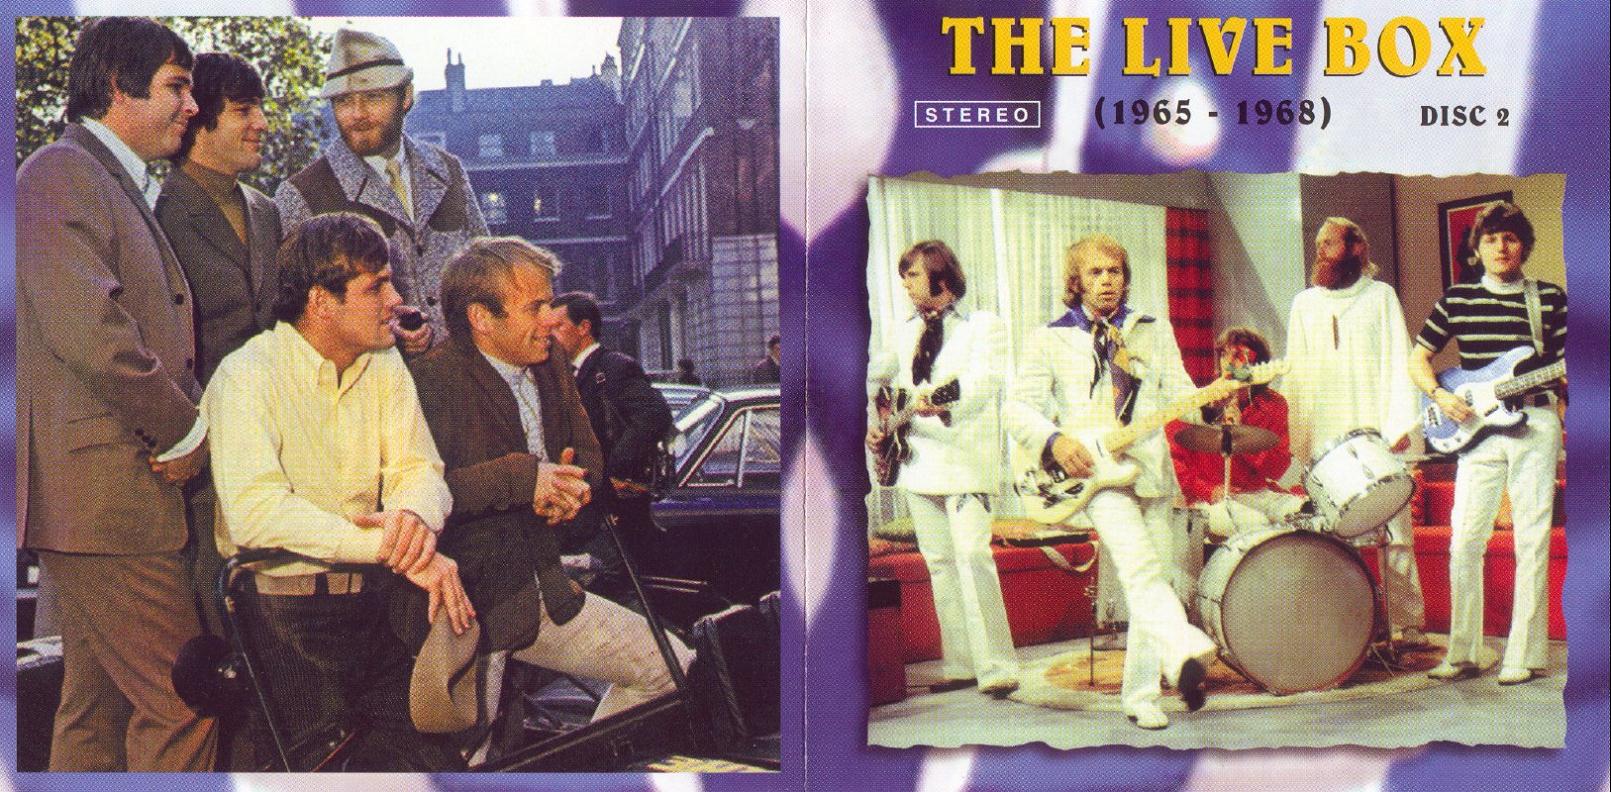 1966-10-22-The_Live_Box-cd2-front